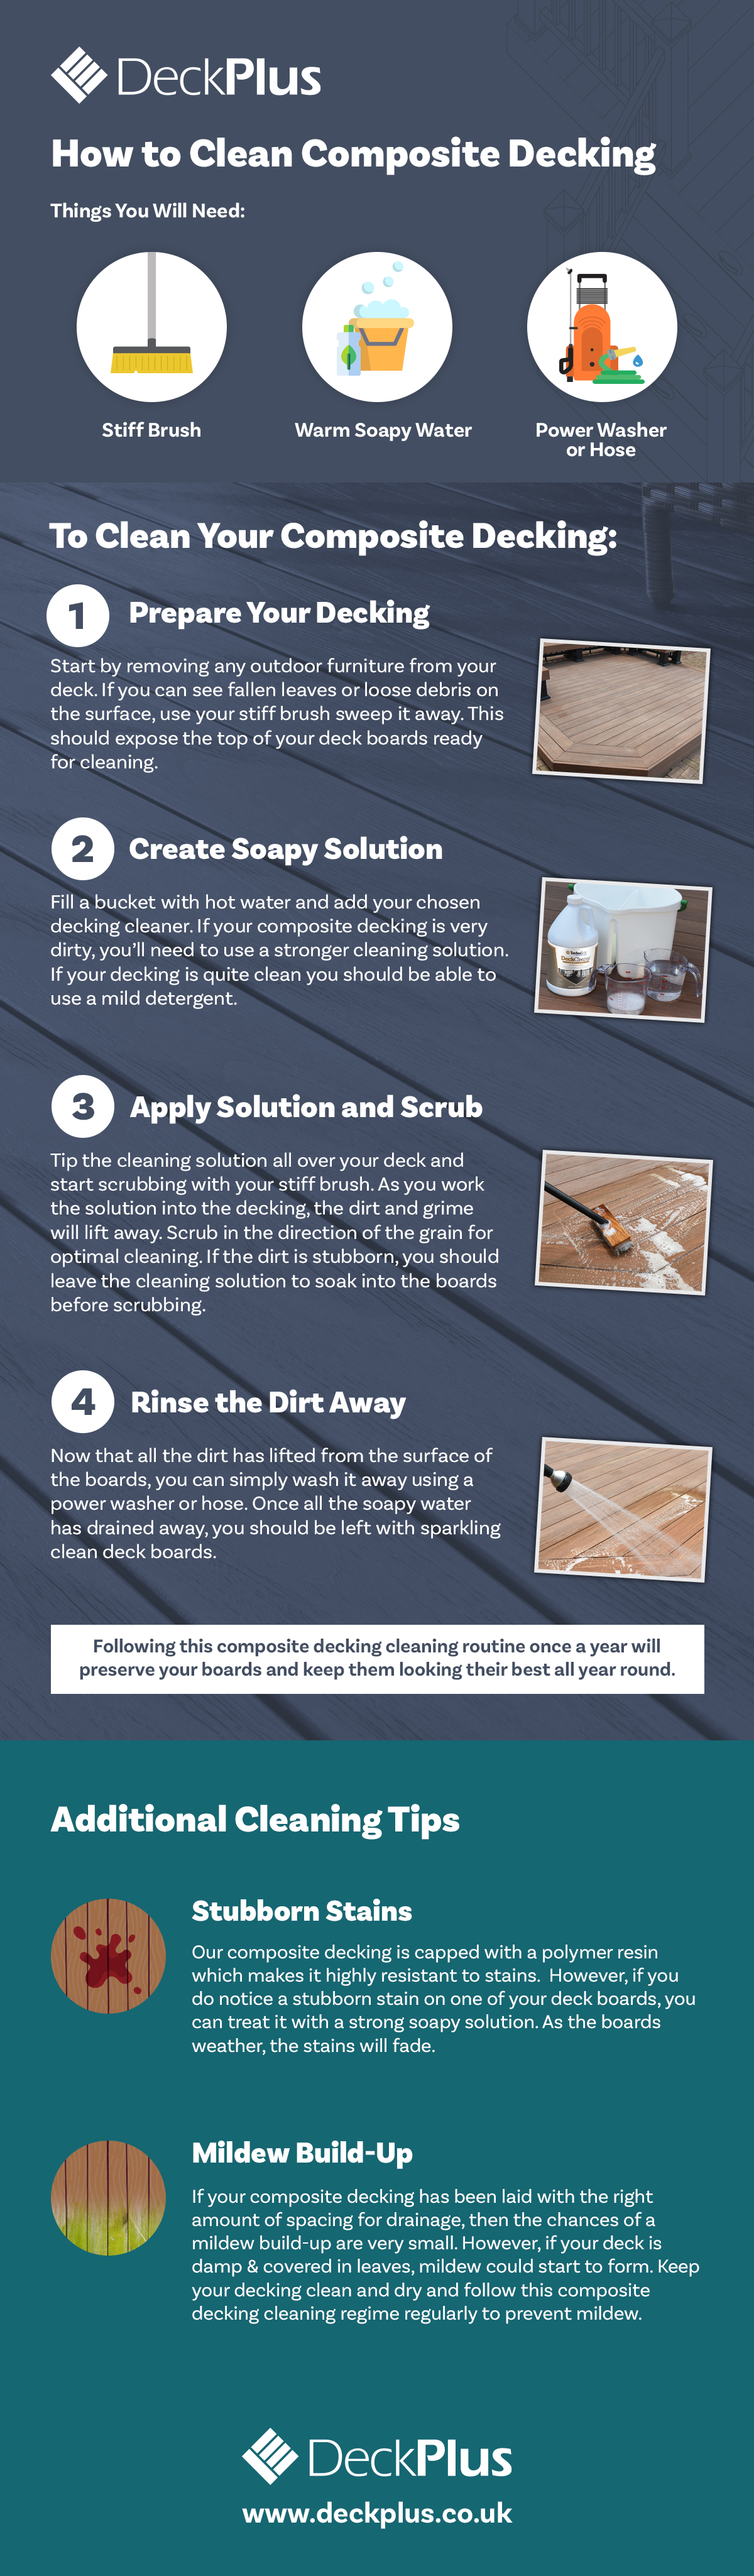 how to clean composite decking